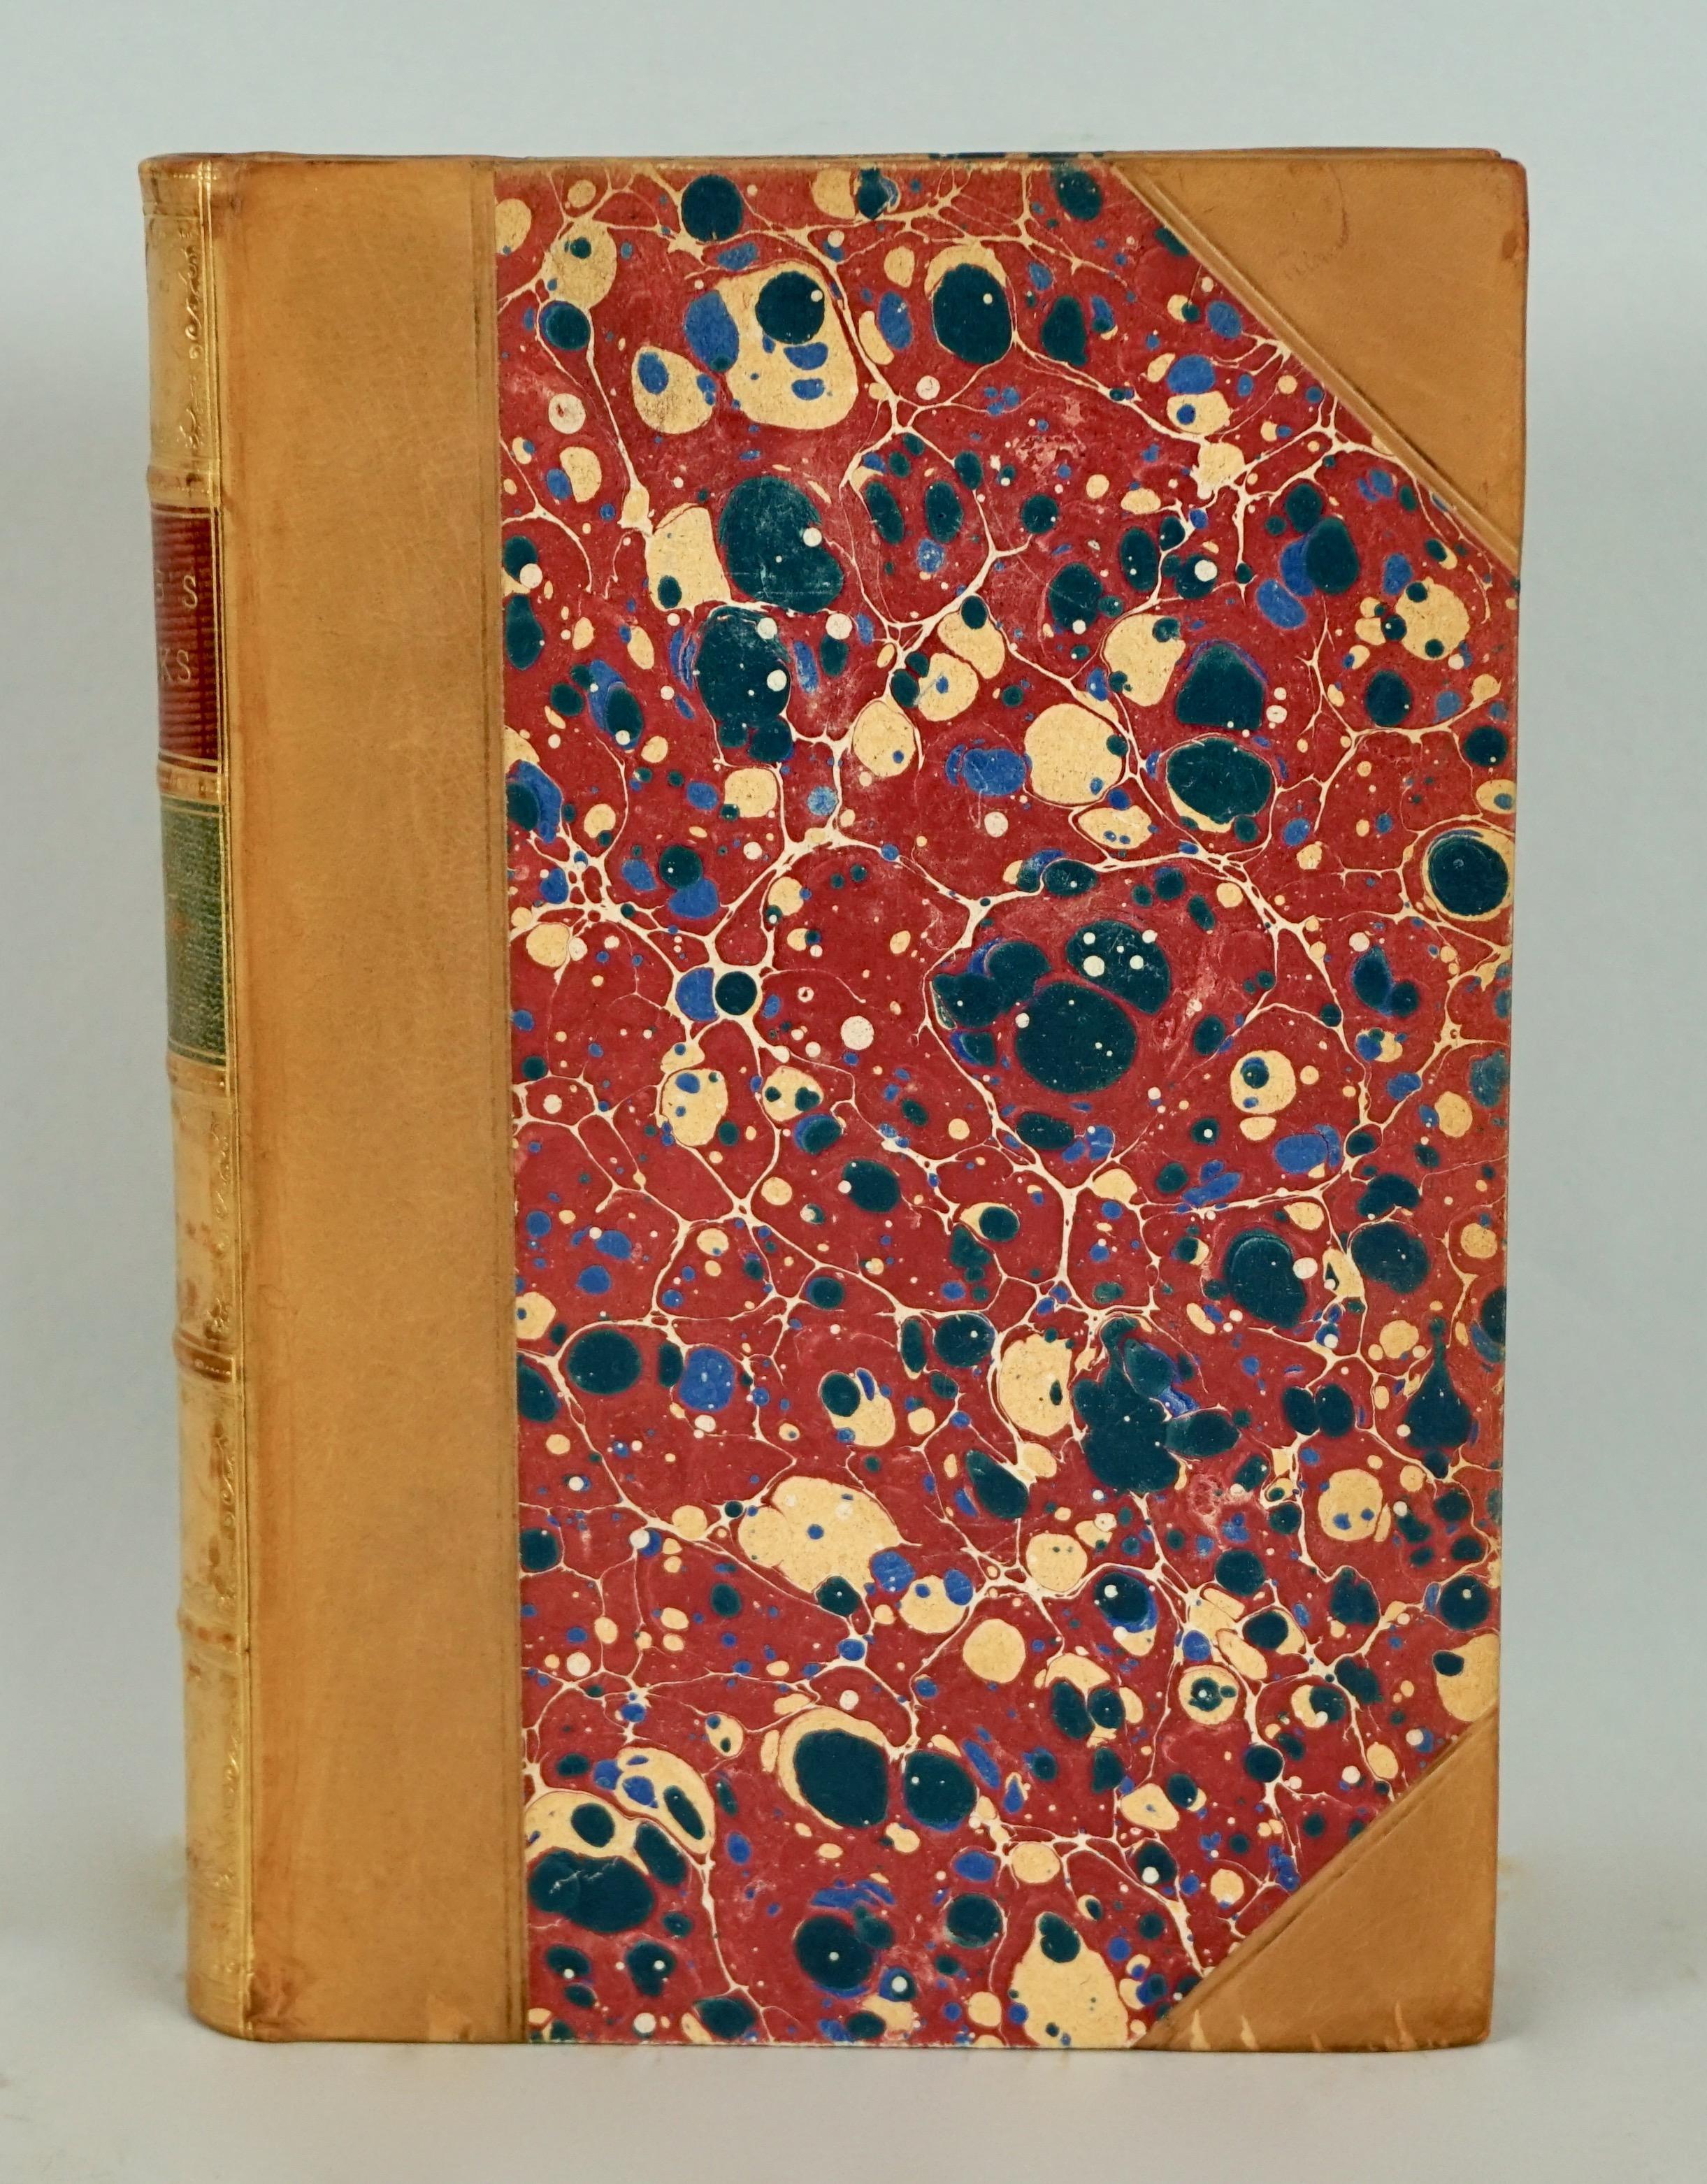 The works of Charles Lamb (1775-1834) famous British essayist and poet, bound in 3/4 leather with marbleized endpapers and marbled pages. Lamb was referred to by his principal biographer as 